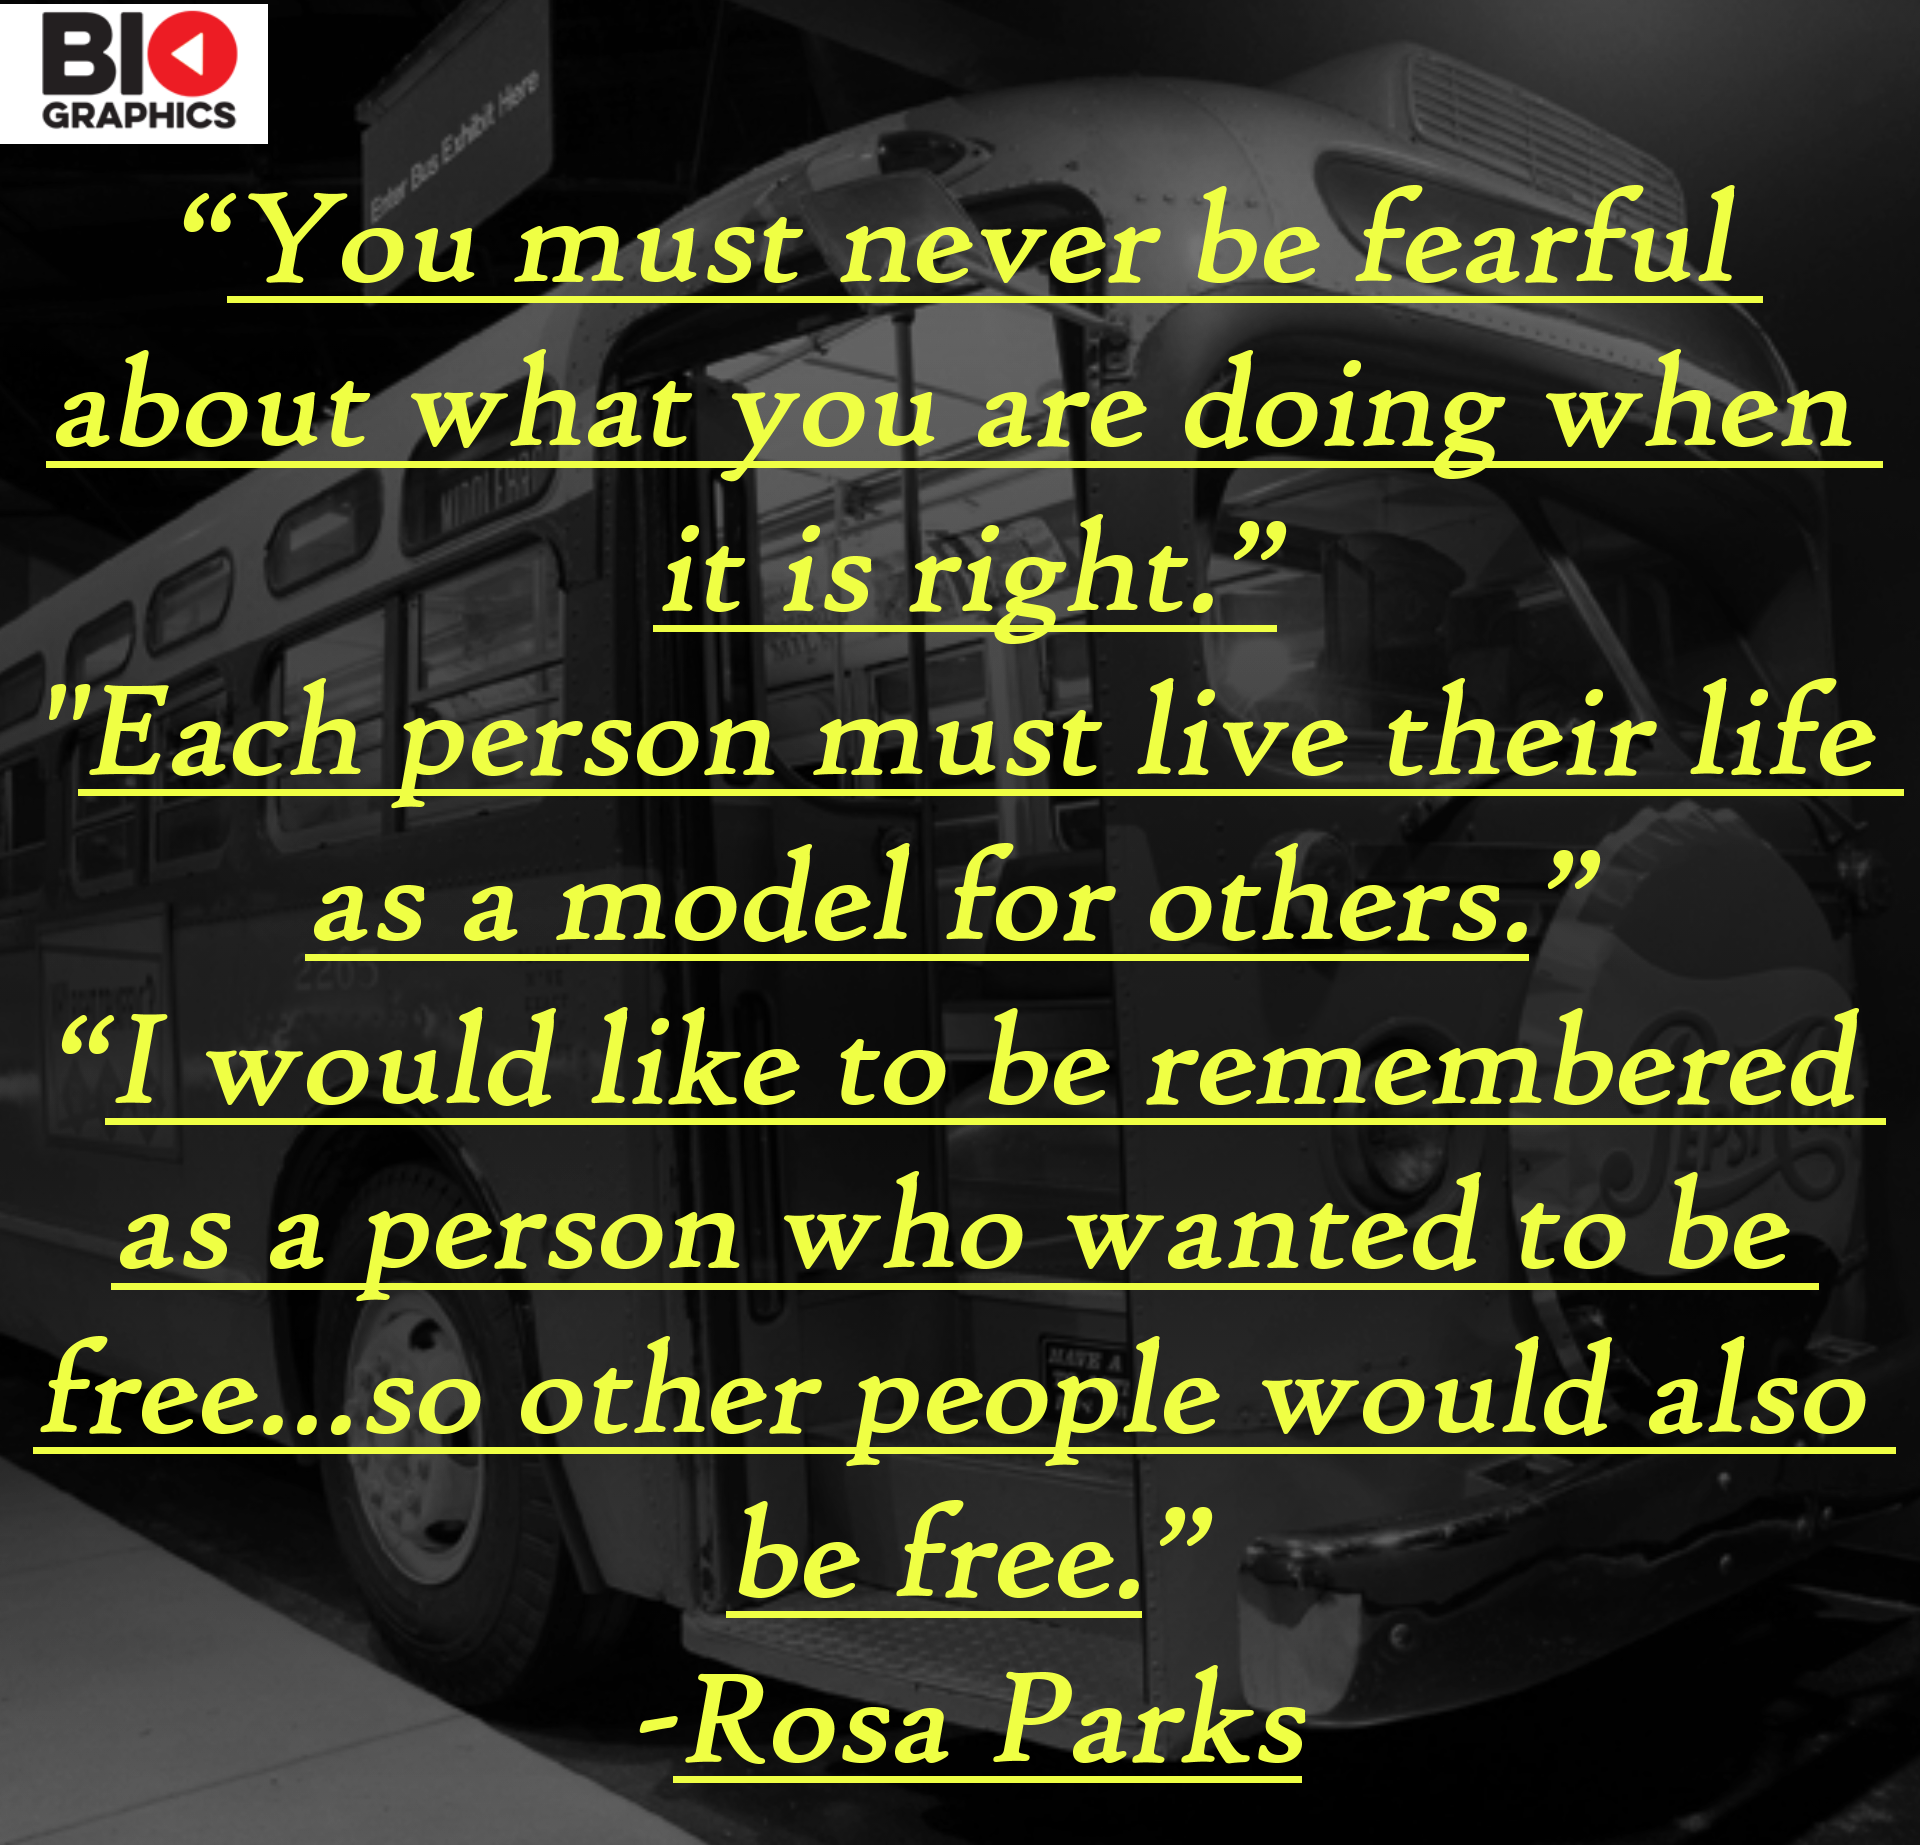 Three inspirational Rosa Parks quotes.